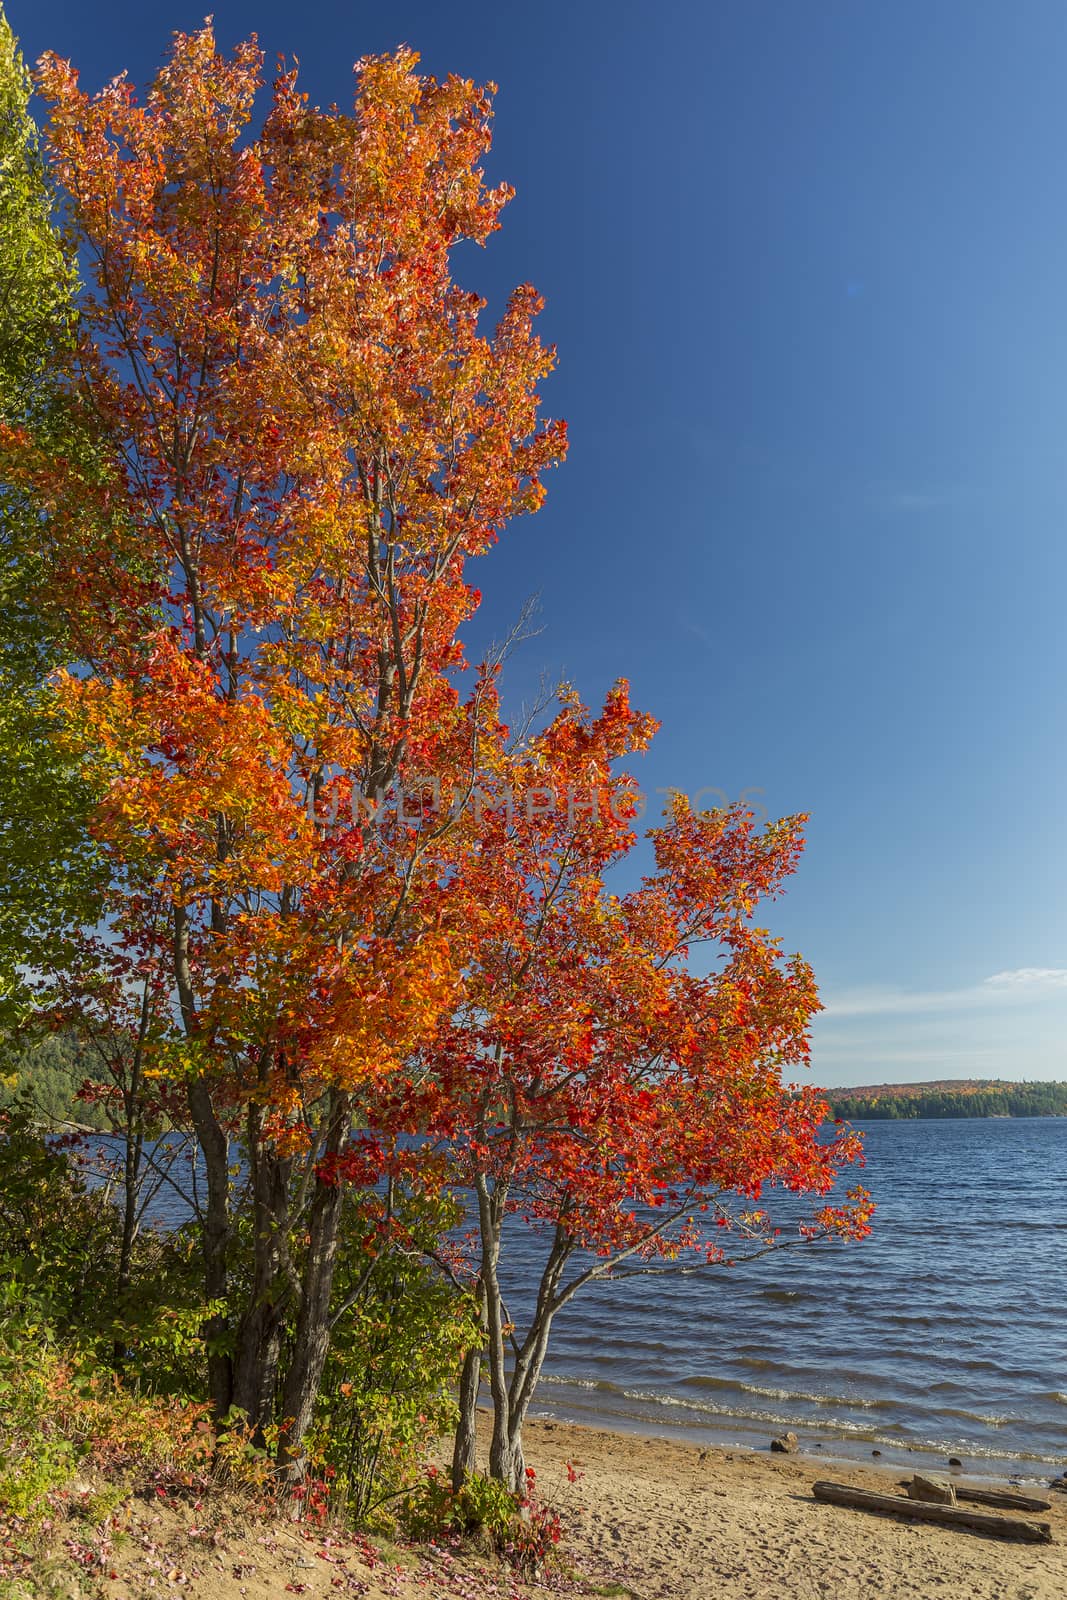 Brilliant Sugar Maple on a Lakeshore - Ontario, Canada by gonepaddling